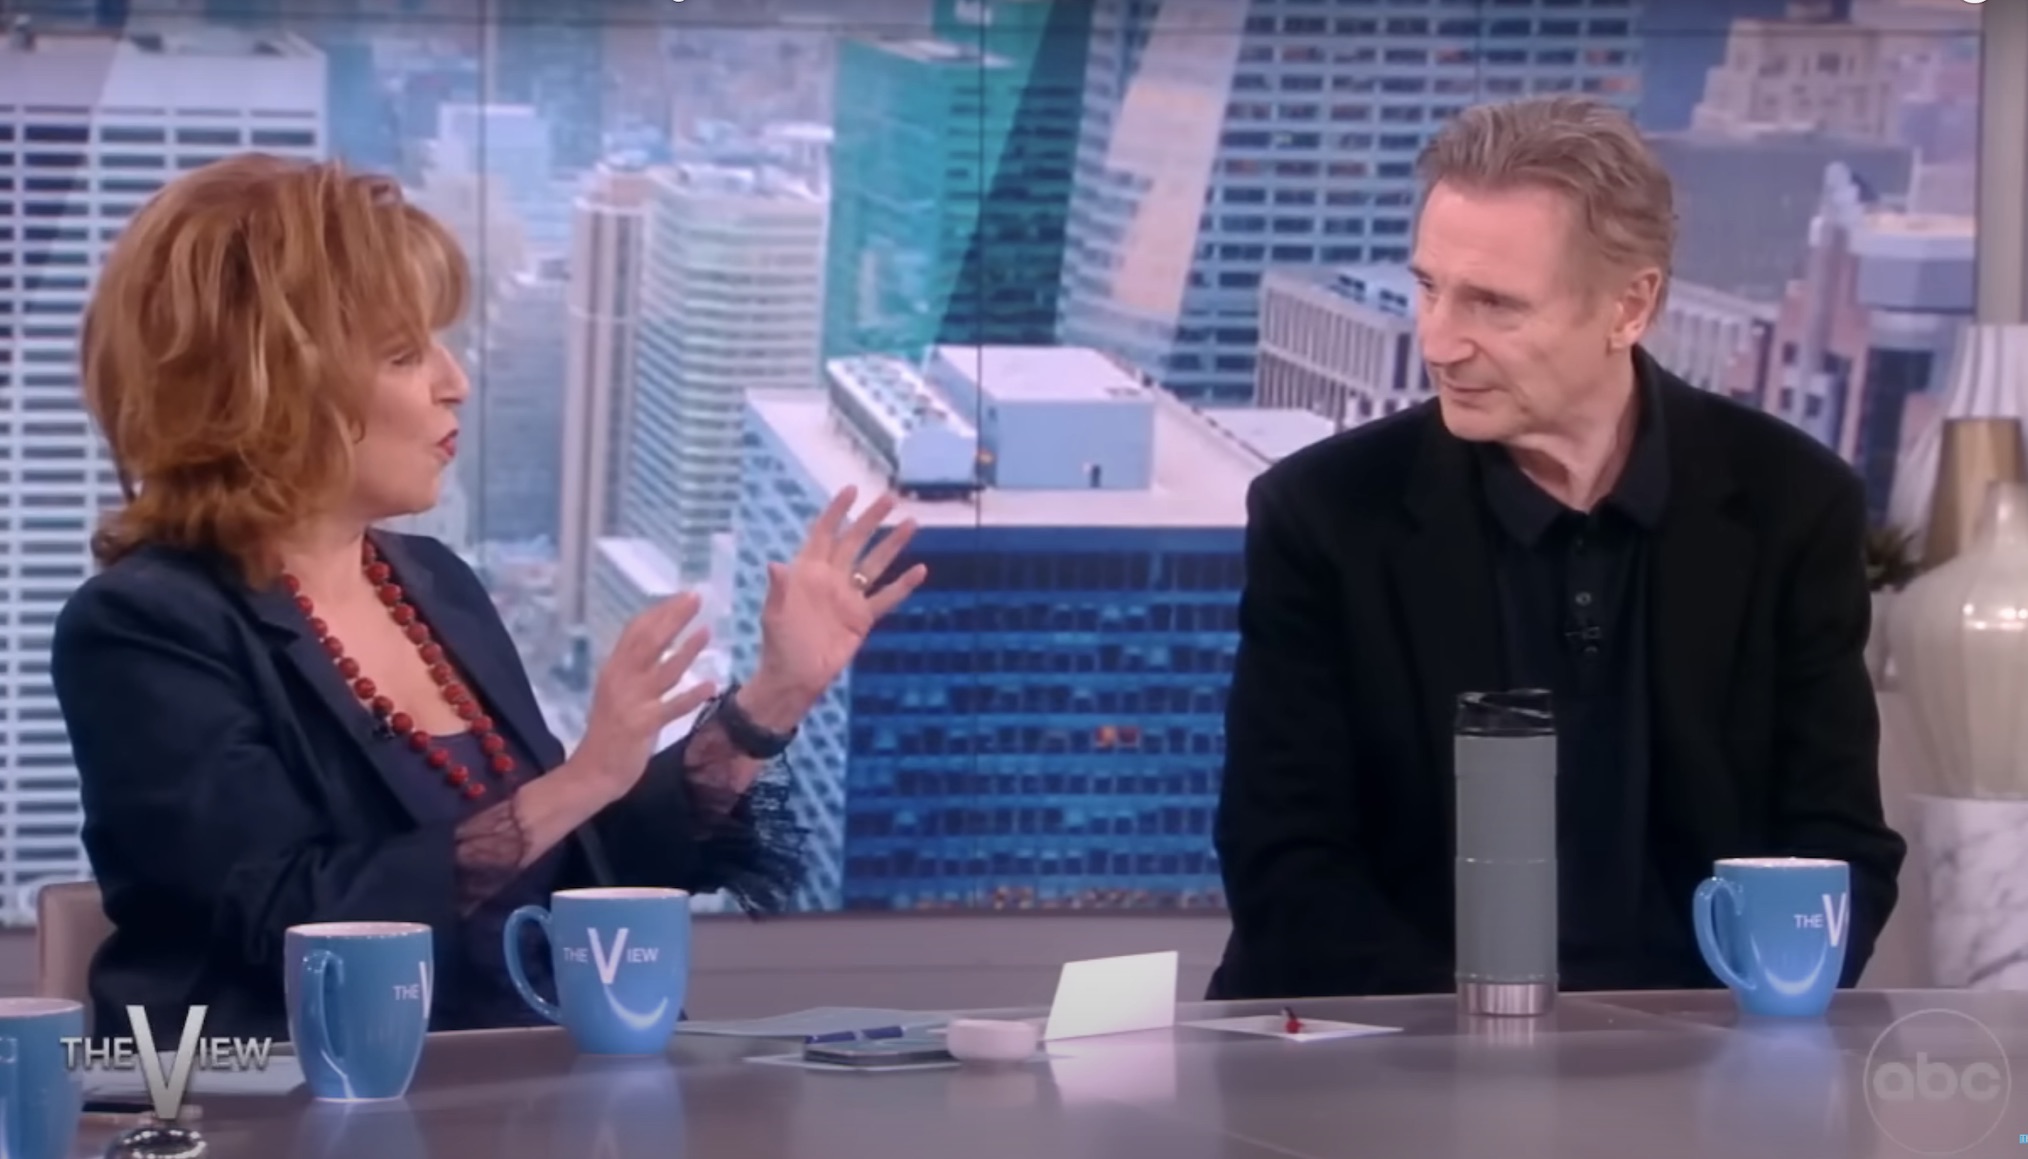 Liam Neeson on The View